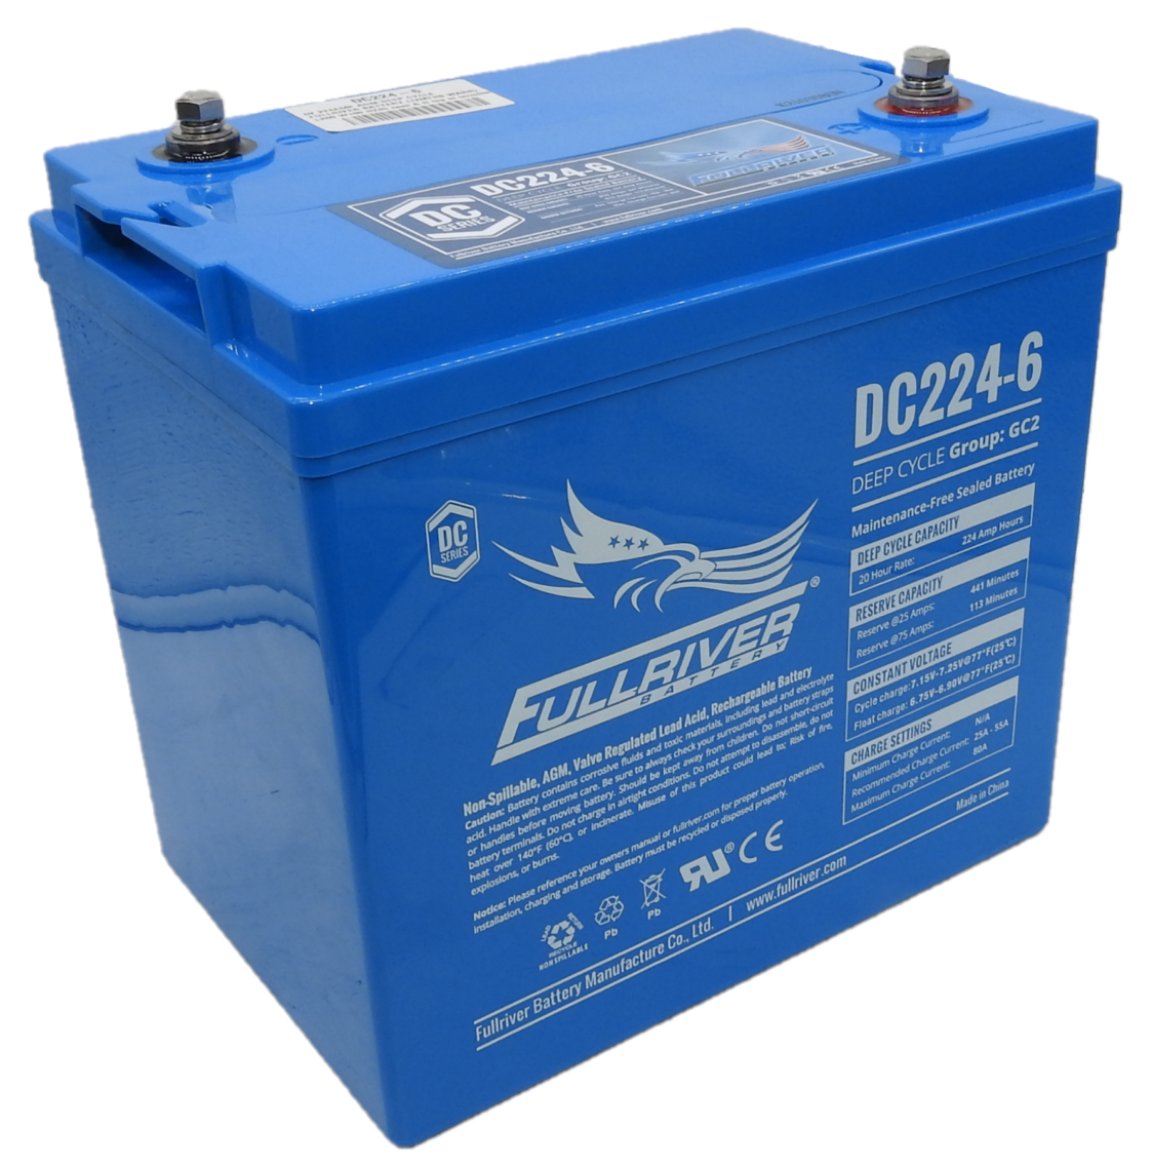 Picture of DC224-6 - 6VOLT 224AH PREMIUM FULL RIVER AGM DEEP CYCLE BATTERY - RHP